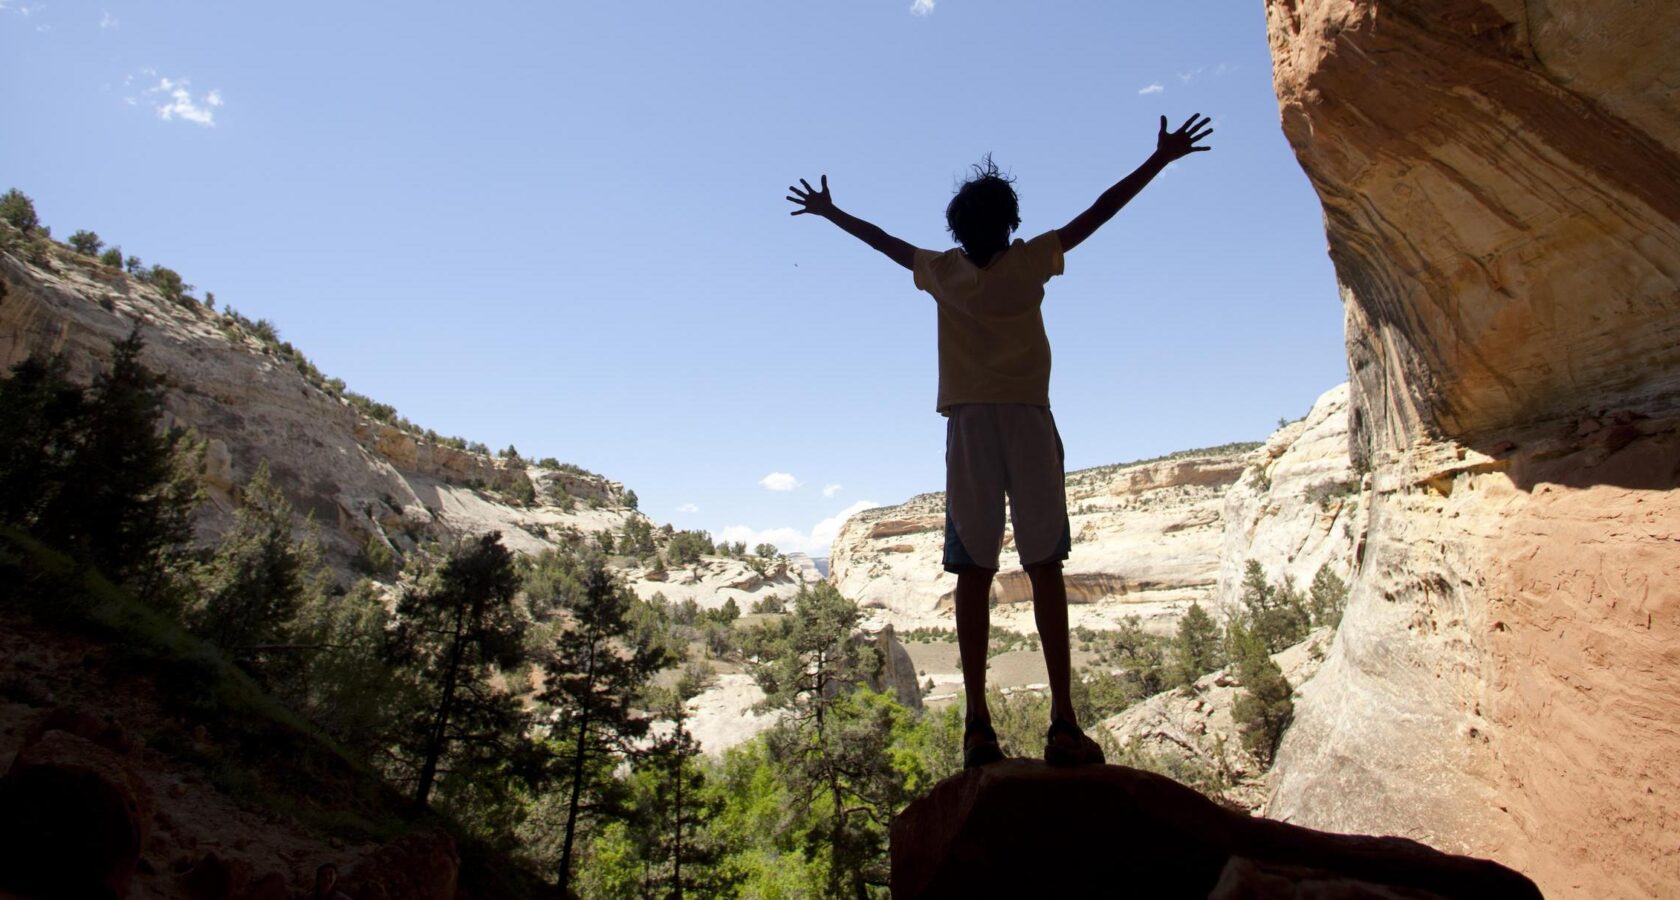 A person raises their arms to celebrate rocks on the Yampa River.